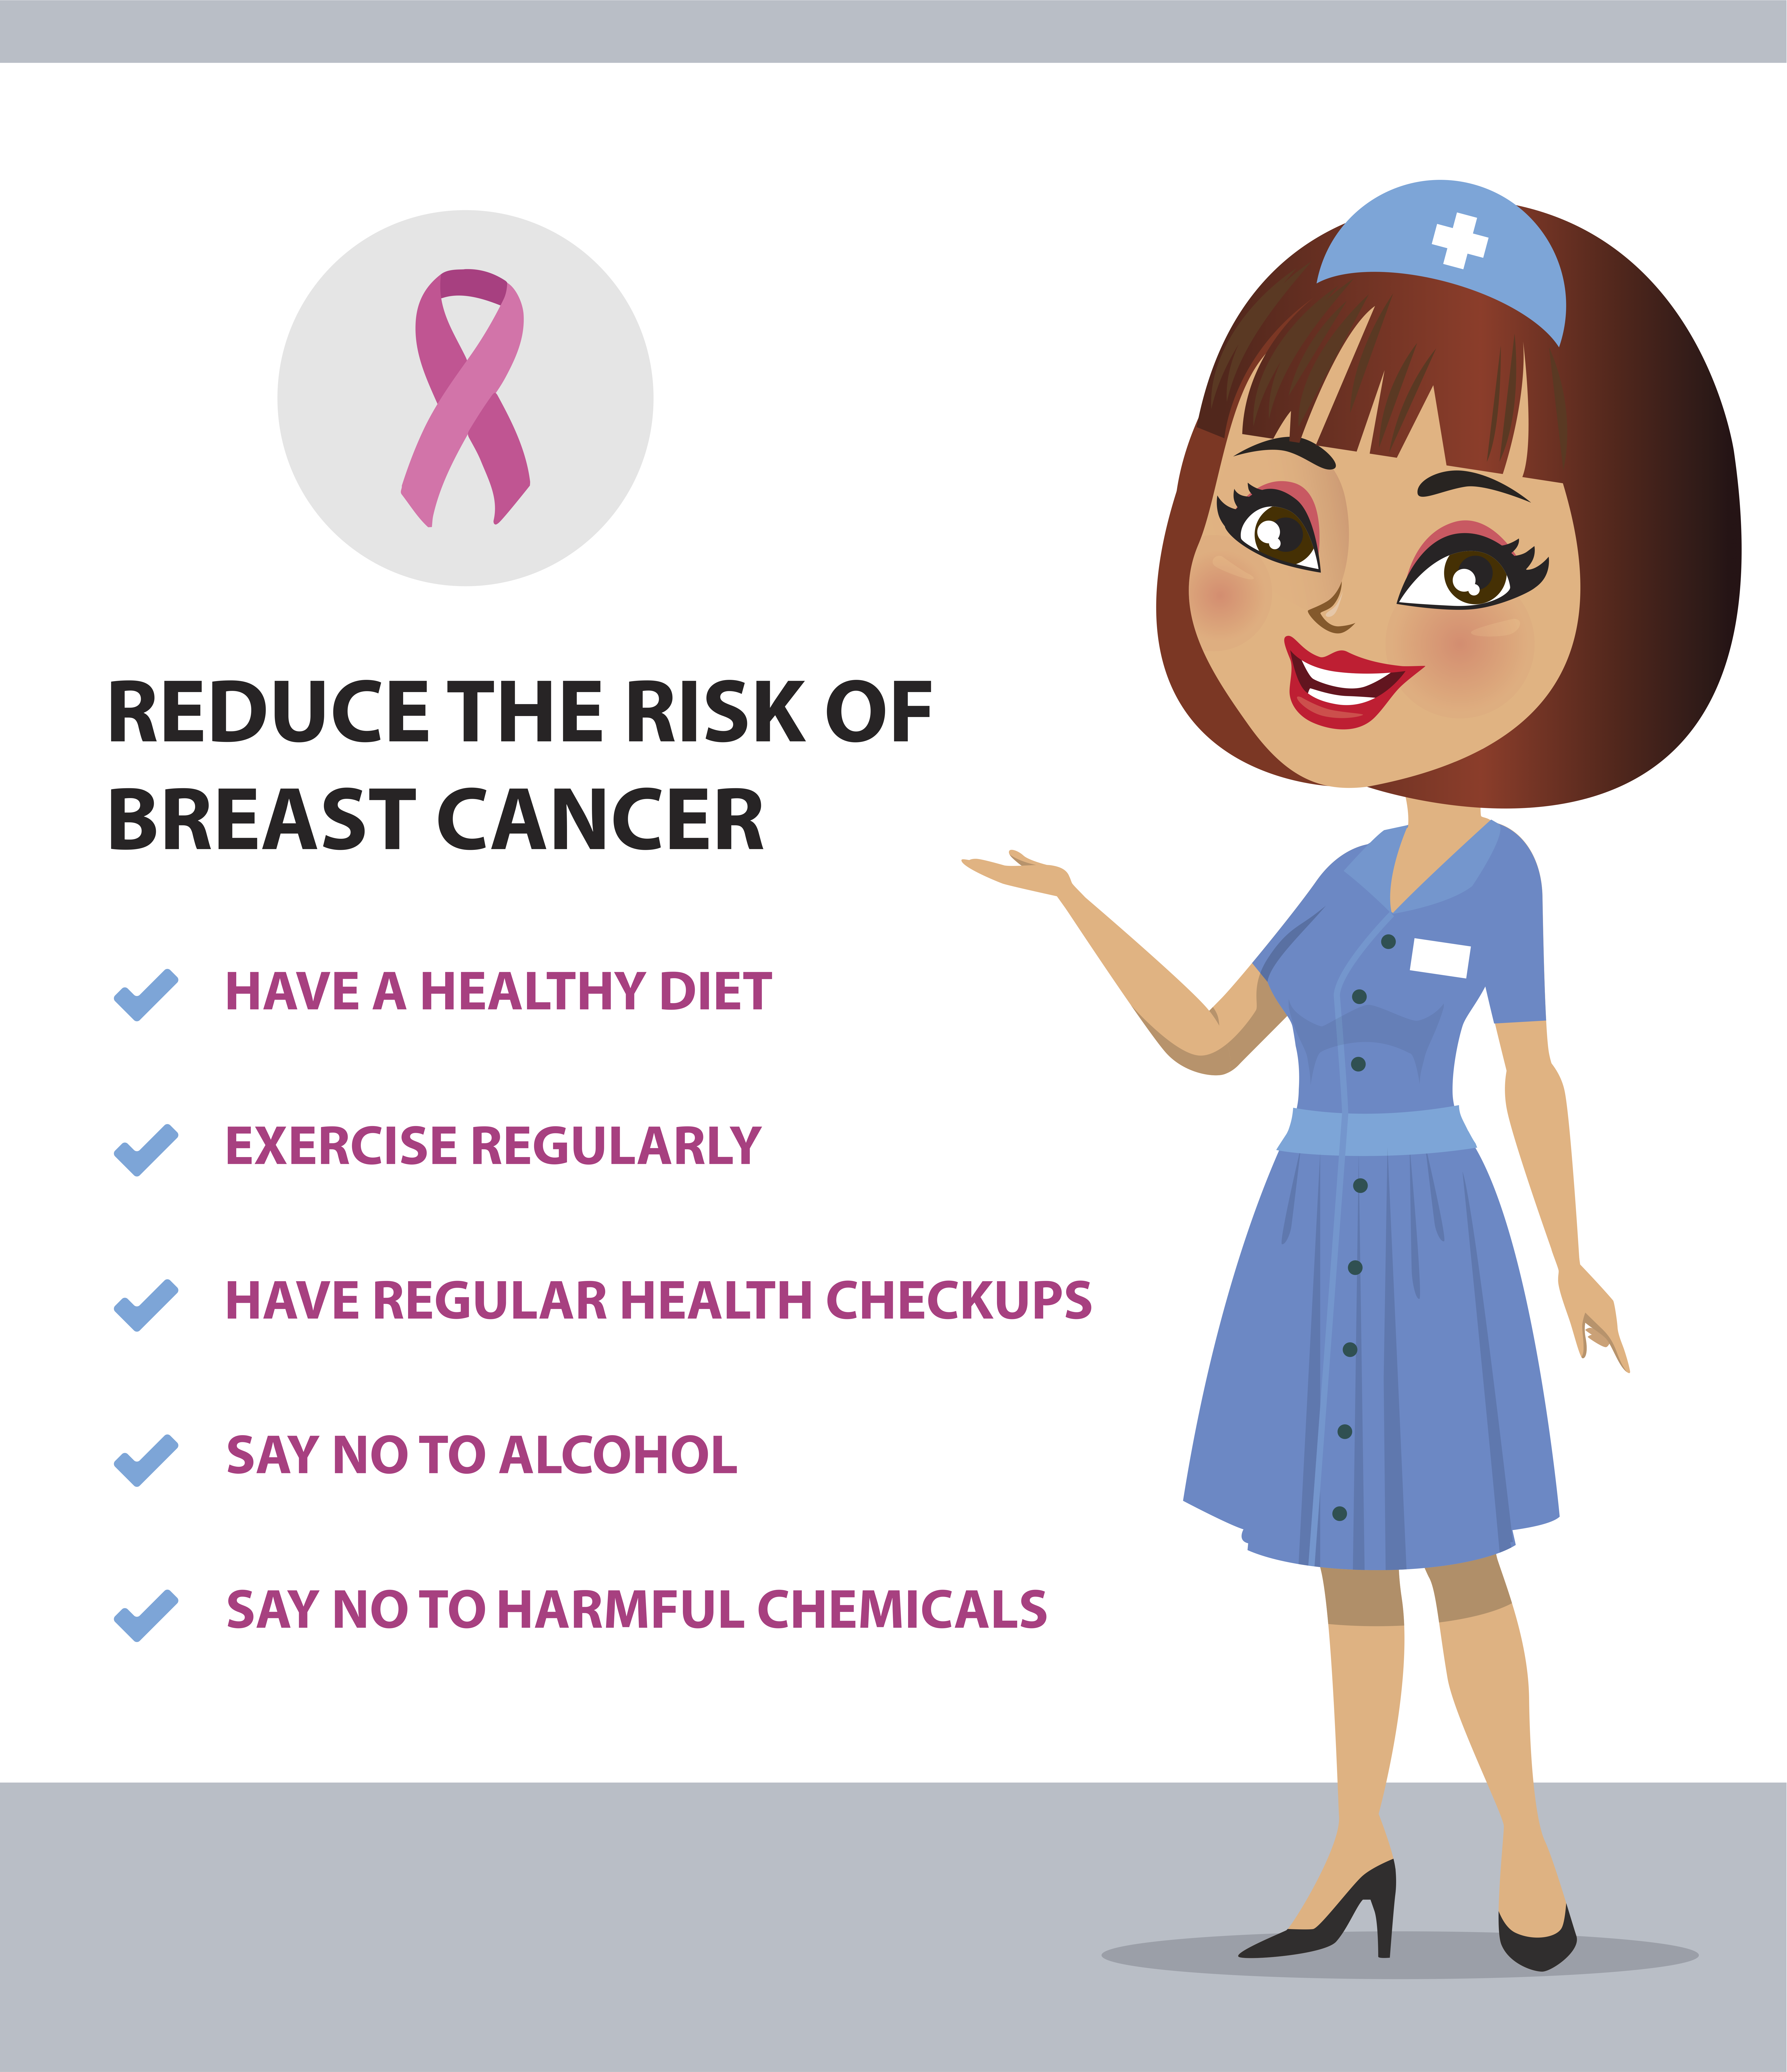 What Are Some Ways To Reduce Breast Cancer Risk?